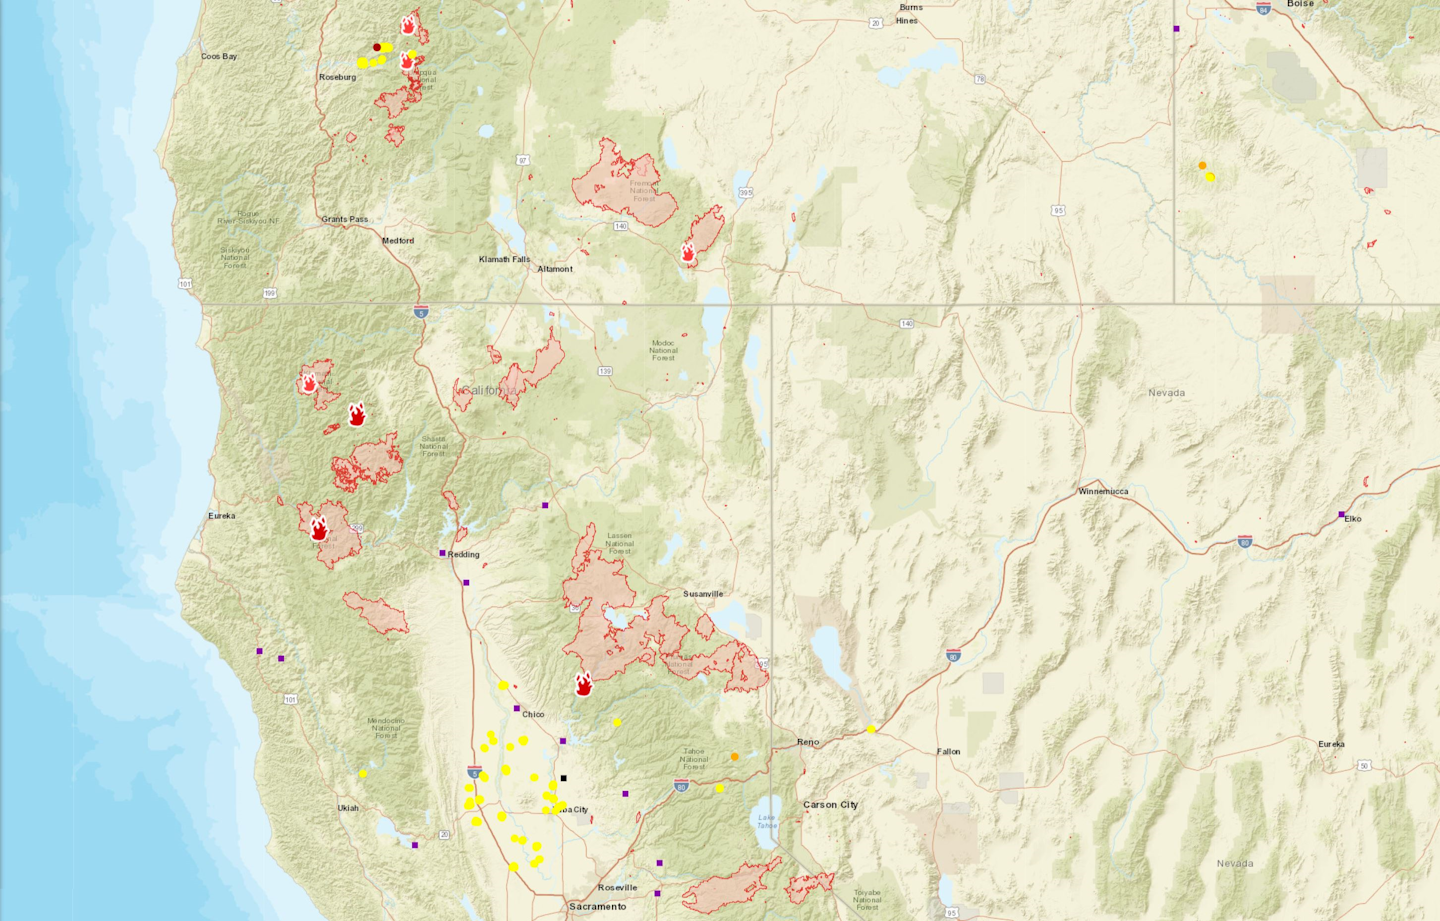 Map showing 2021 wildfire burn areas